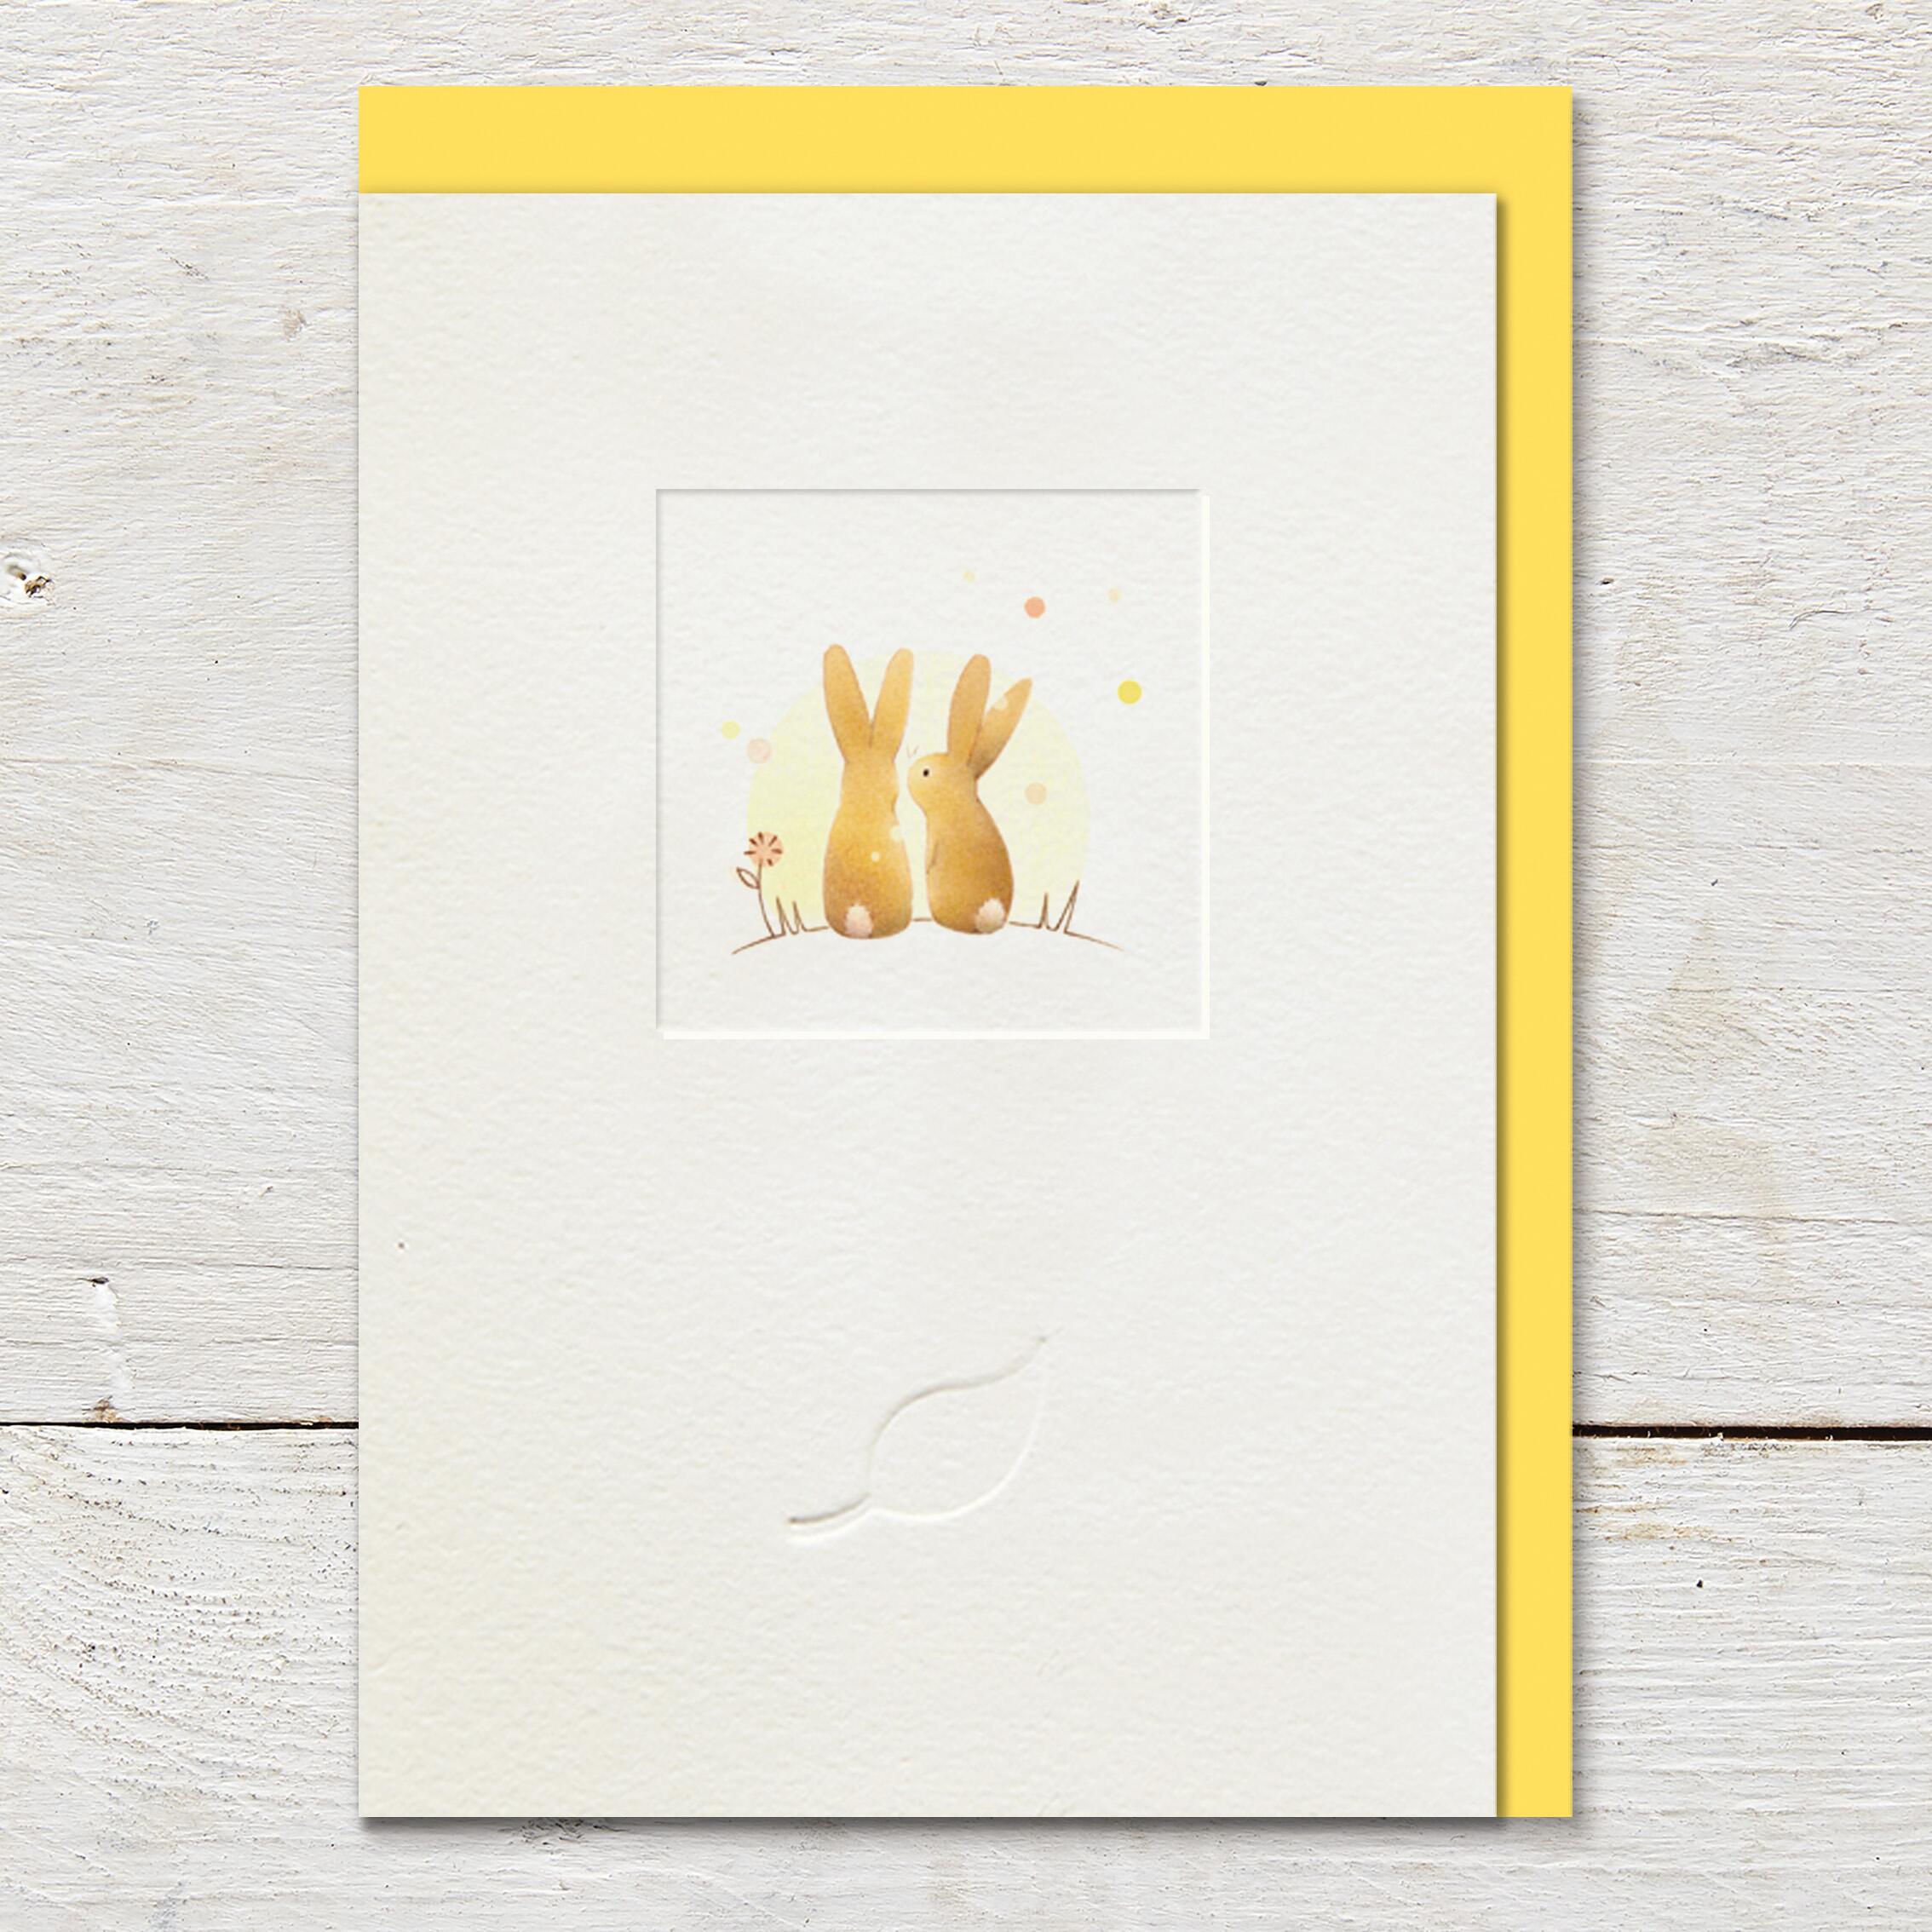 Card featuring an illustration of two cute rabbits sitting on a sunny hillside in the middle of a small debossed window panel. Card is left blank for an open send